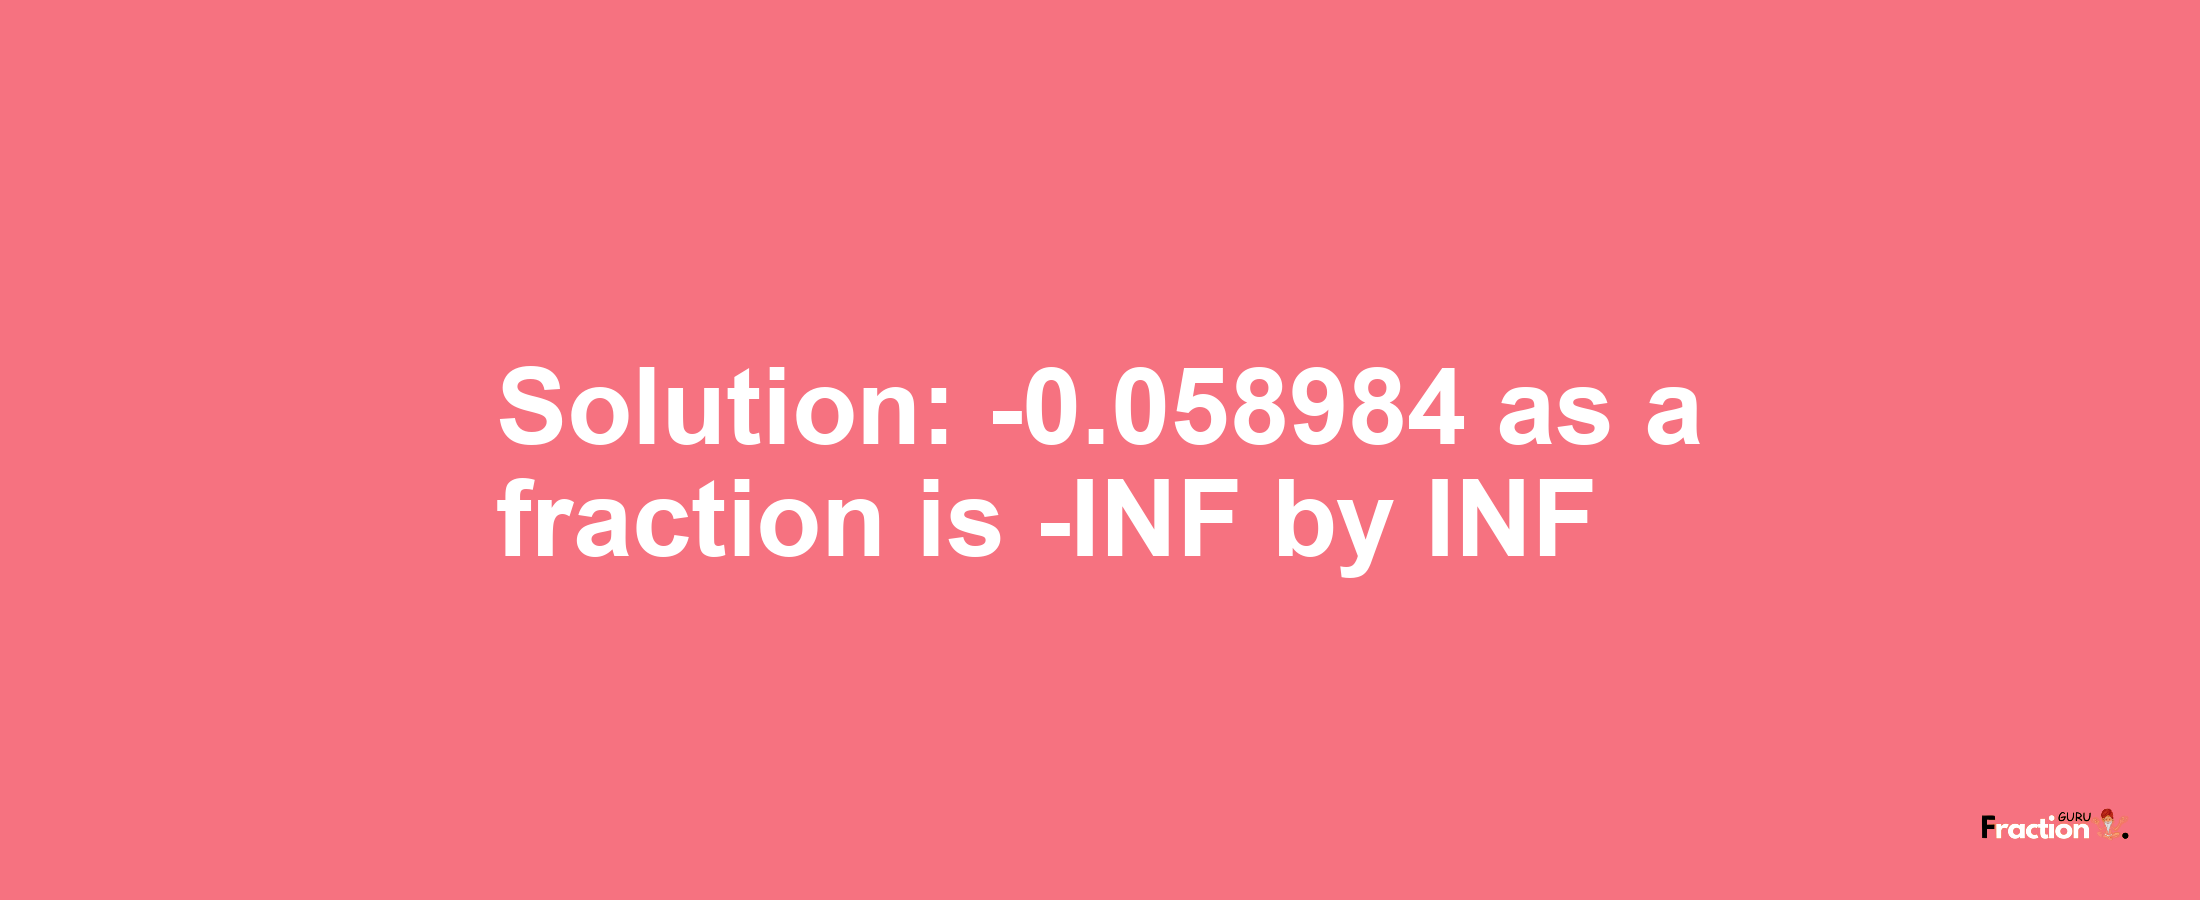 Solution:-0.058984 as a fraction is -INF/INF